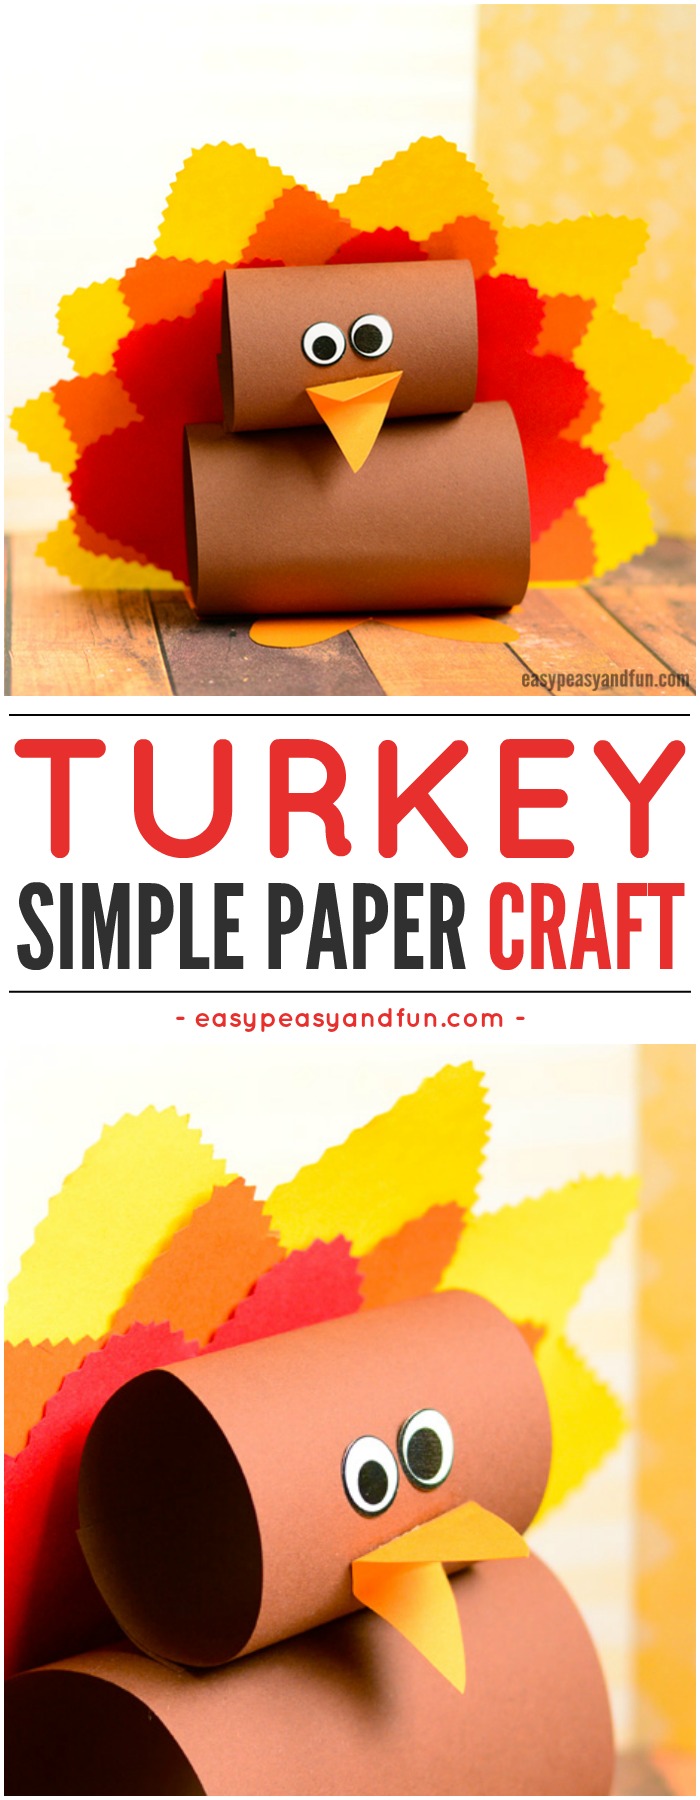 Easy paper turkey craft for kids.  Fun Thanksgiving paper craft ideas to keep them busy.